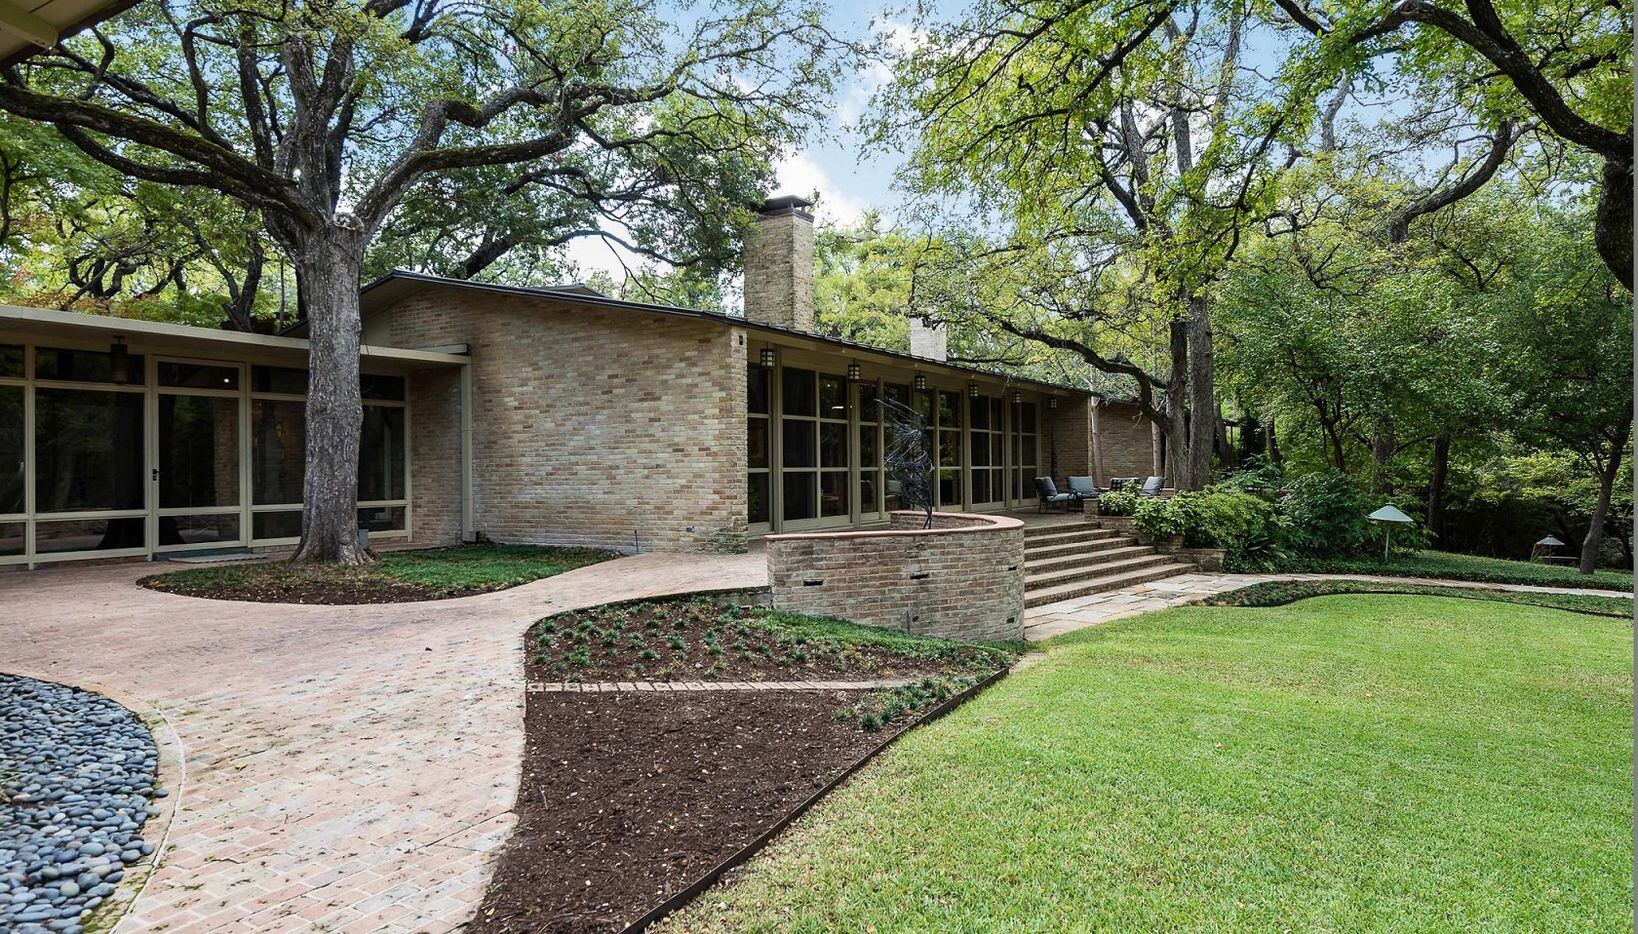 A look at the Haggerty House on Preservation Dallas  Modern Masterpieces Fall Architectural Tour for 2019.